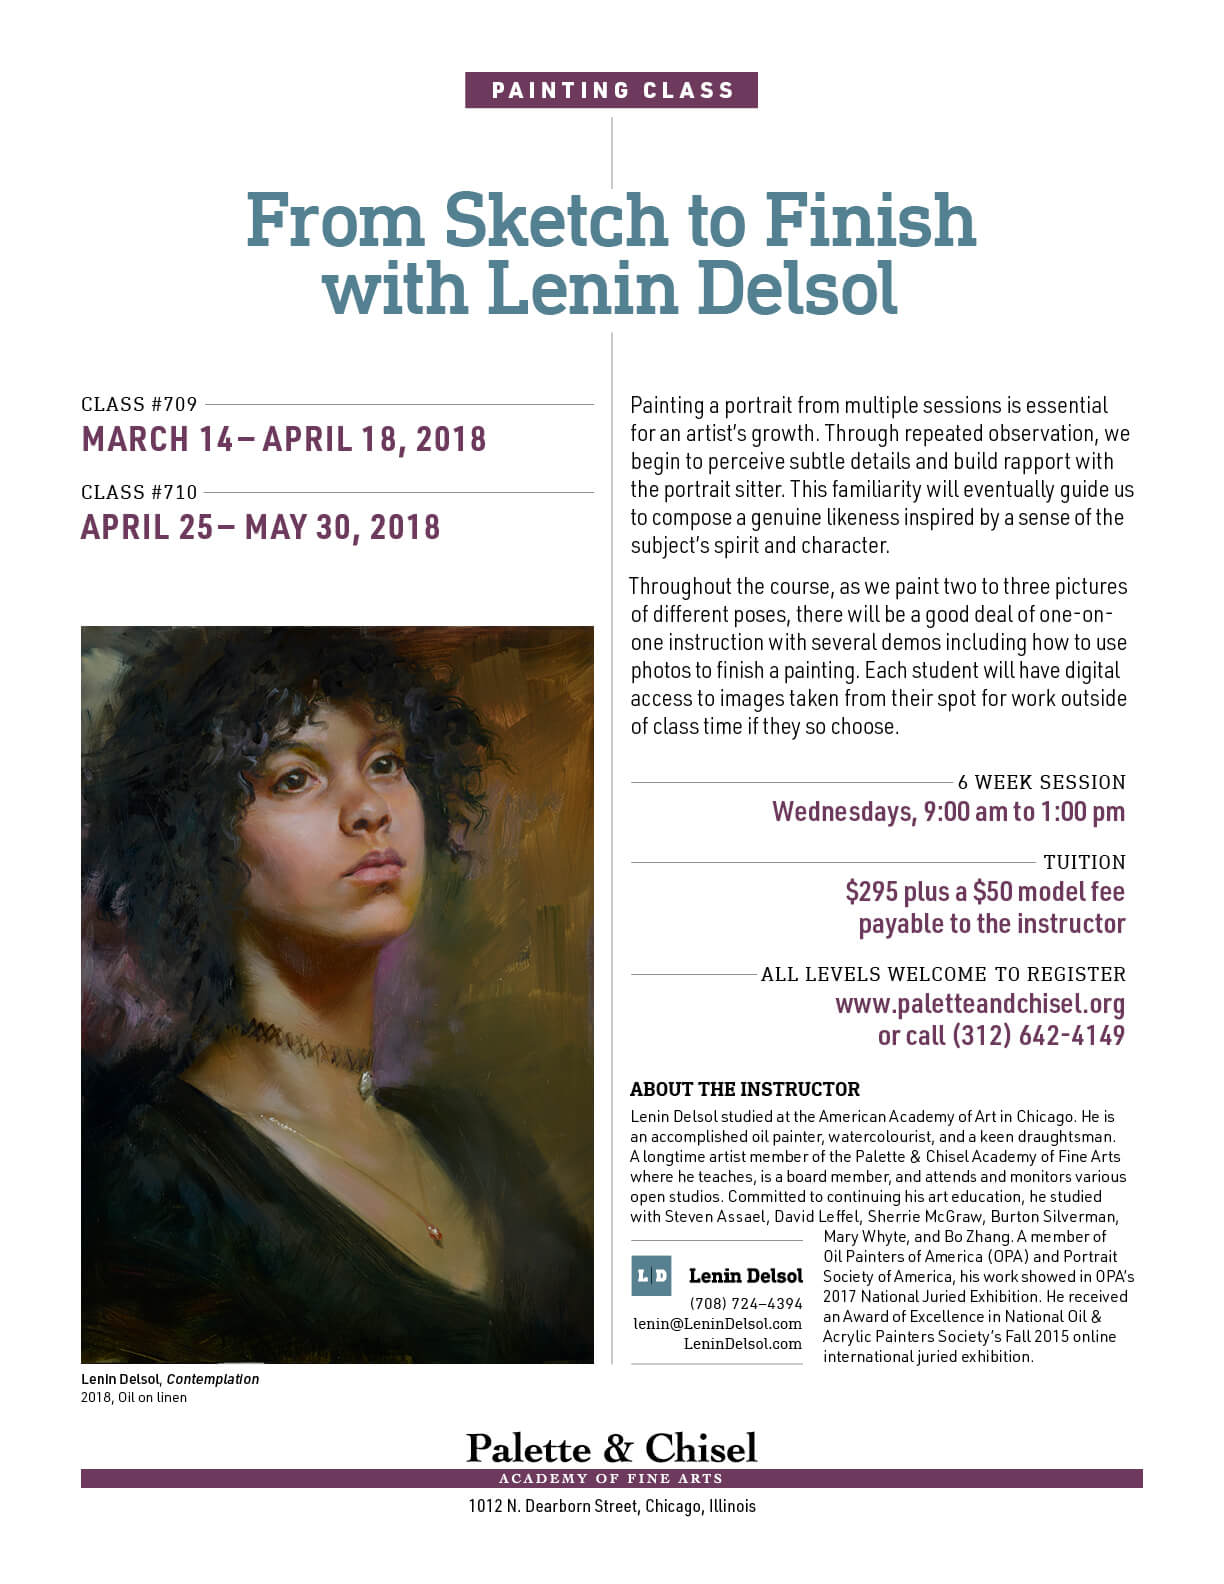 From Sketch To Finish with Lenin Delsol Spring 2018 Sessions